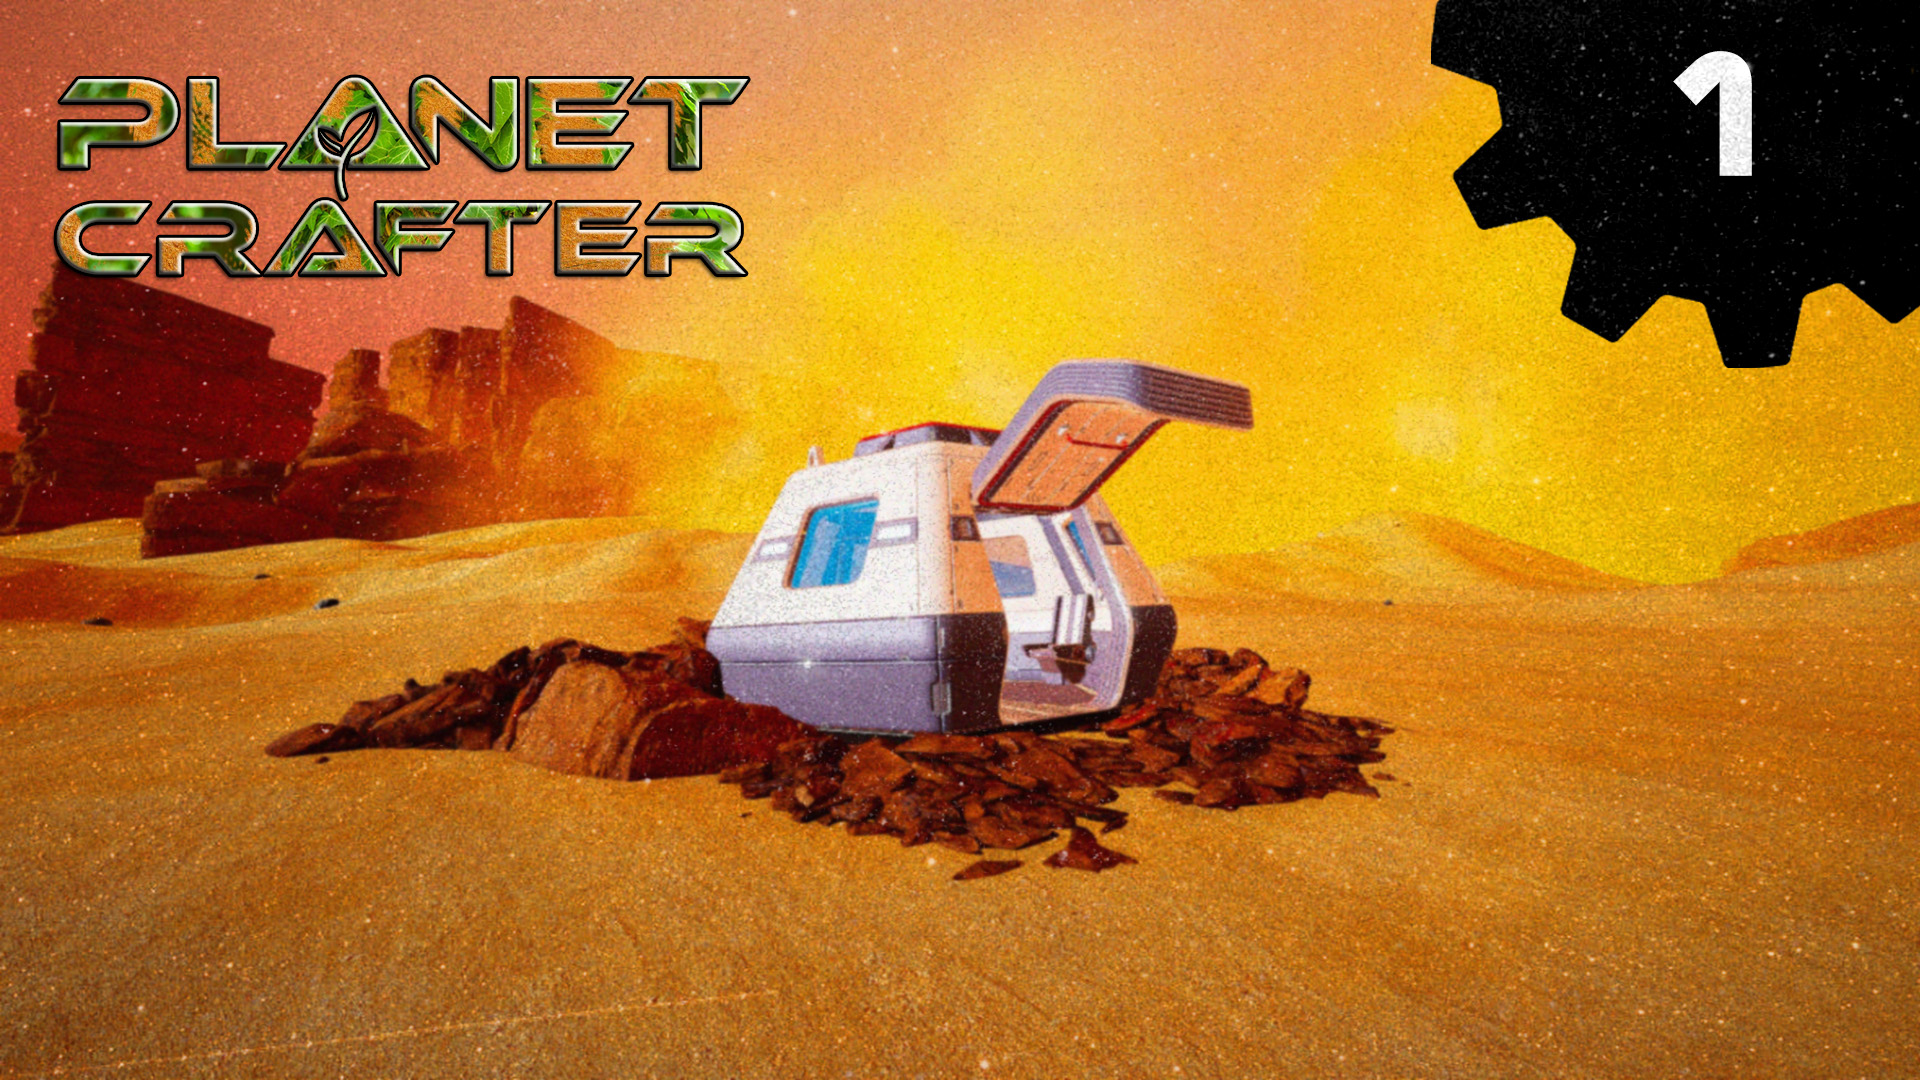 The planet crafter steam фото 100